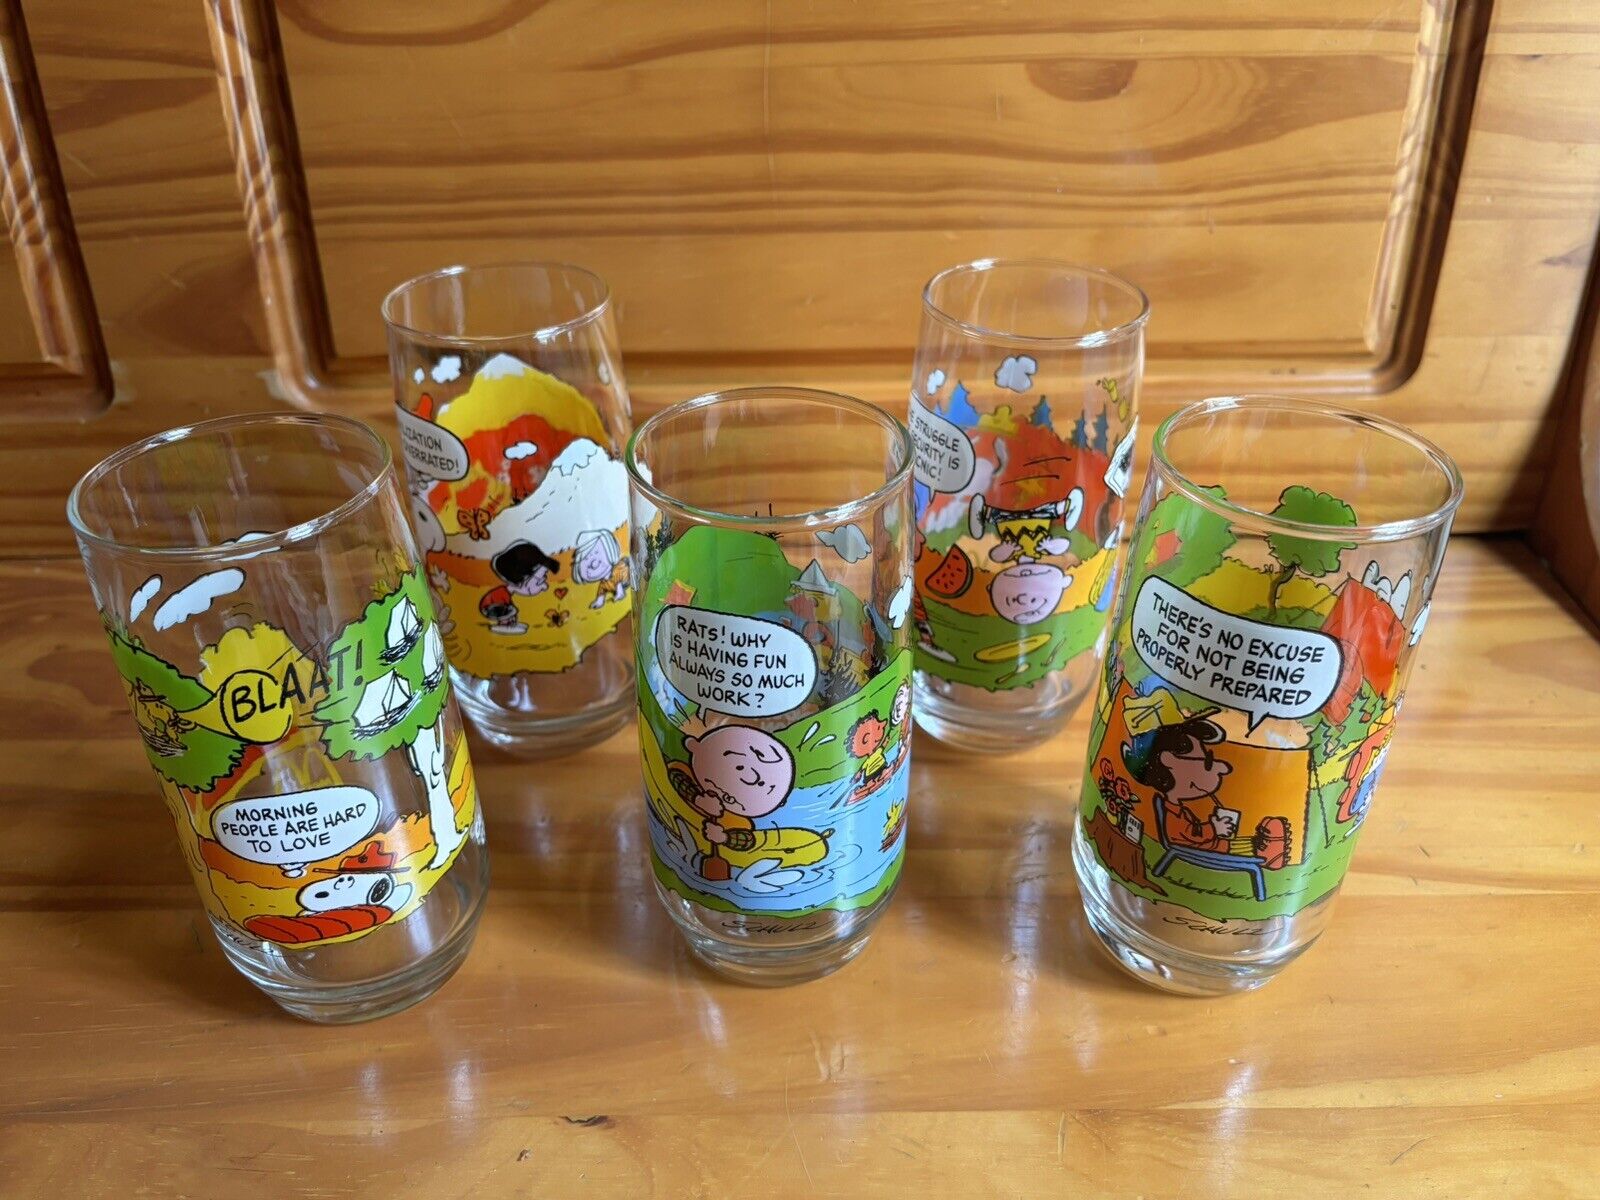 McDonalds Peanuts Camp Snoopy Collection - Complete Set of 5 - Vintage